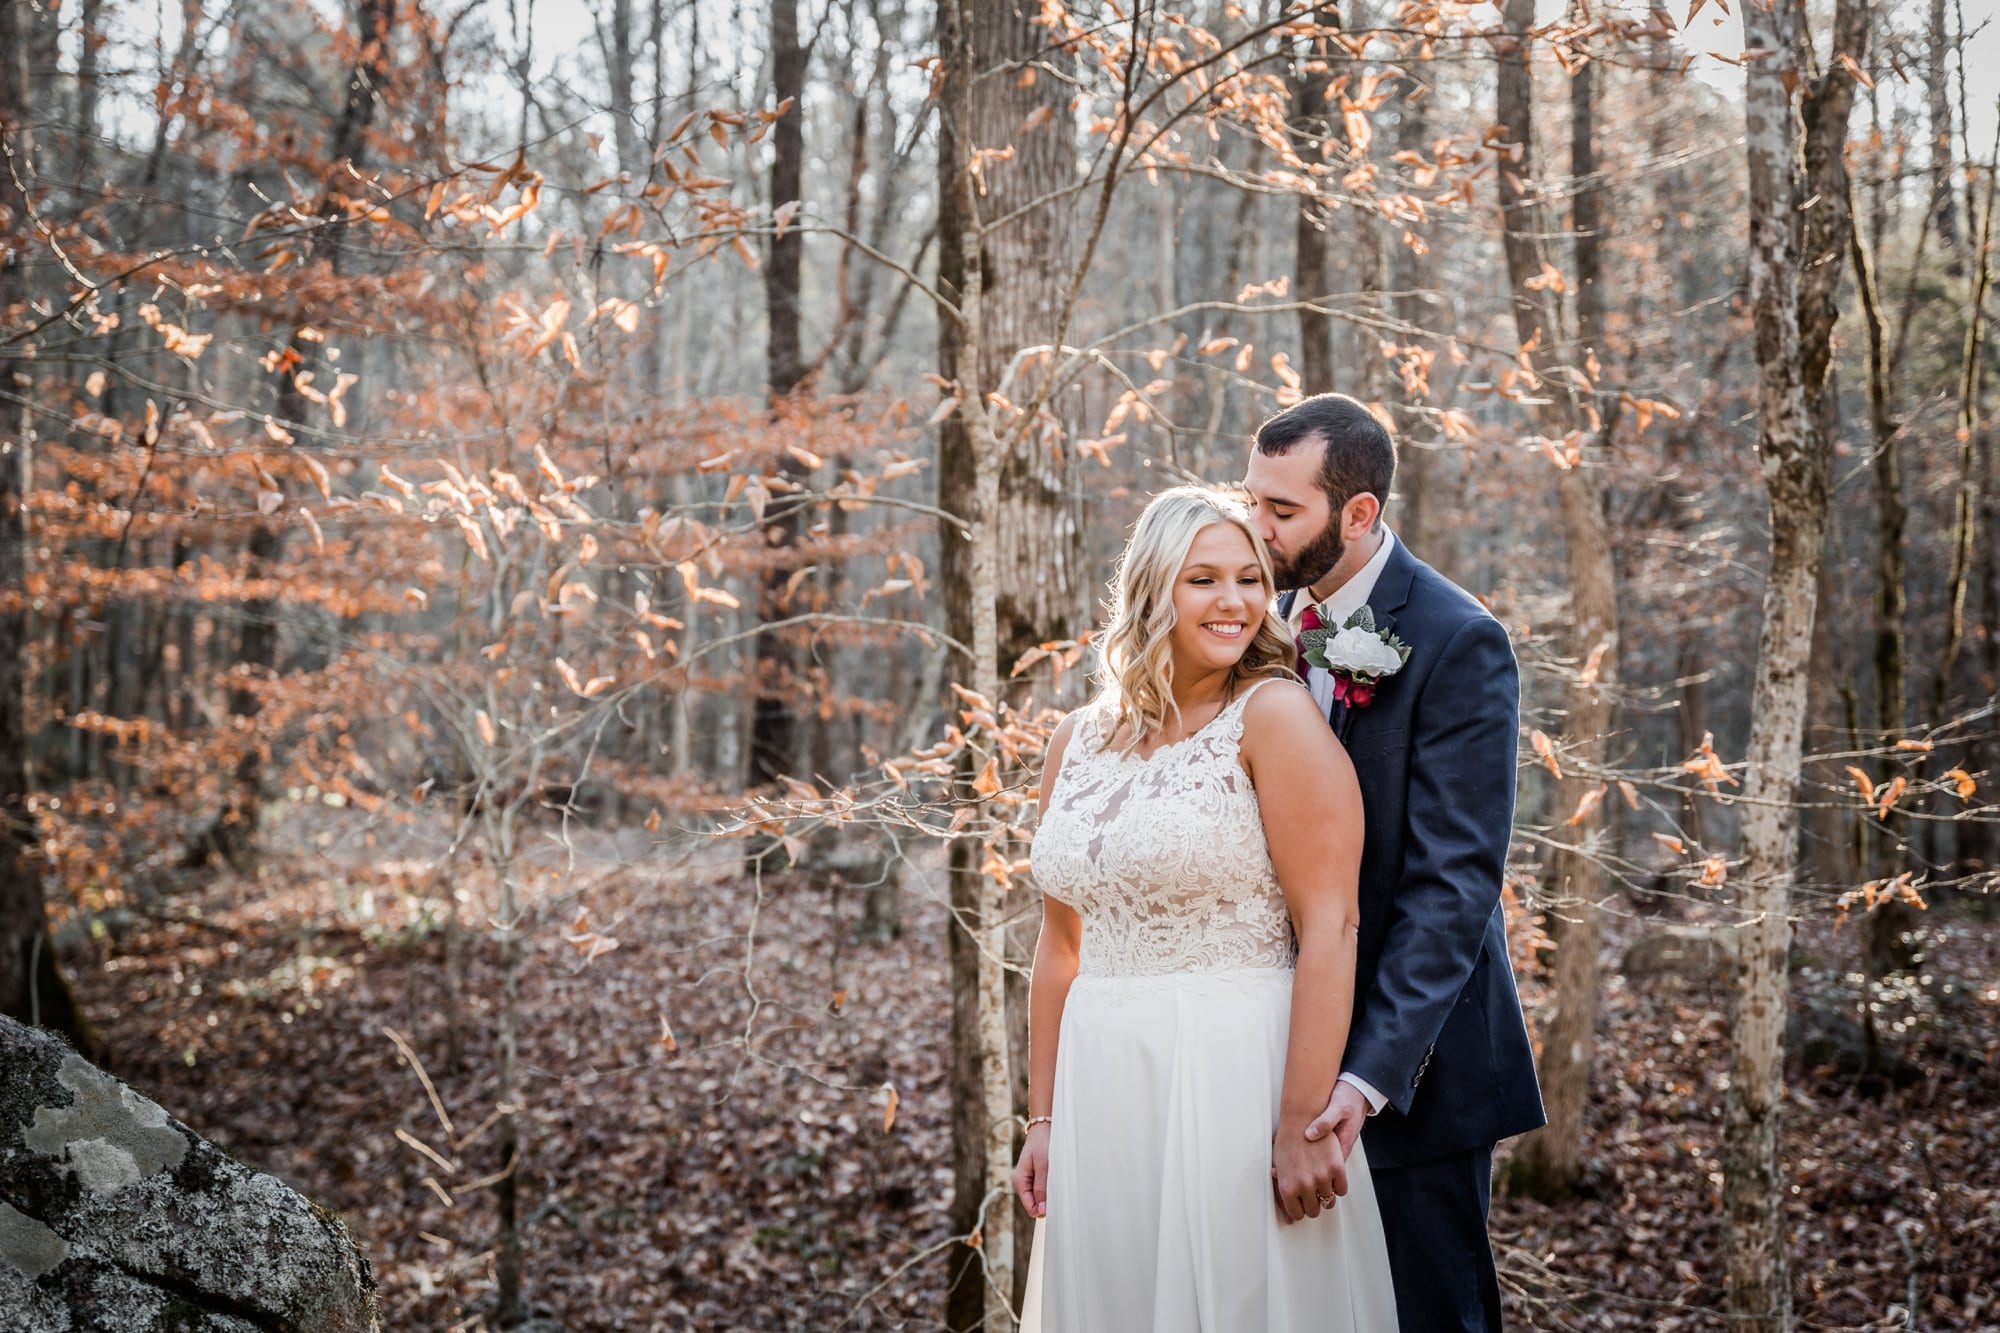 Couple Portraits at Intimate Weddings in the Smoky Mountains